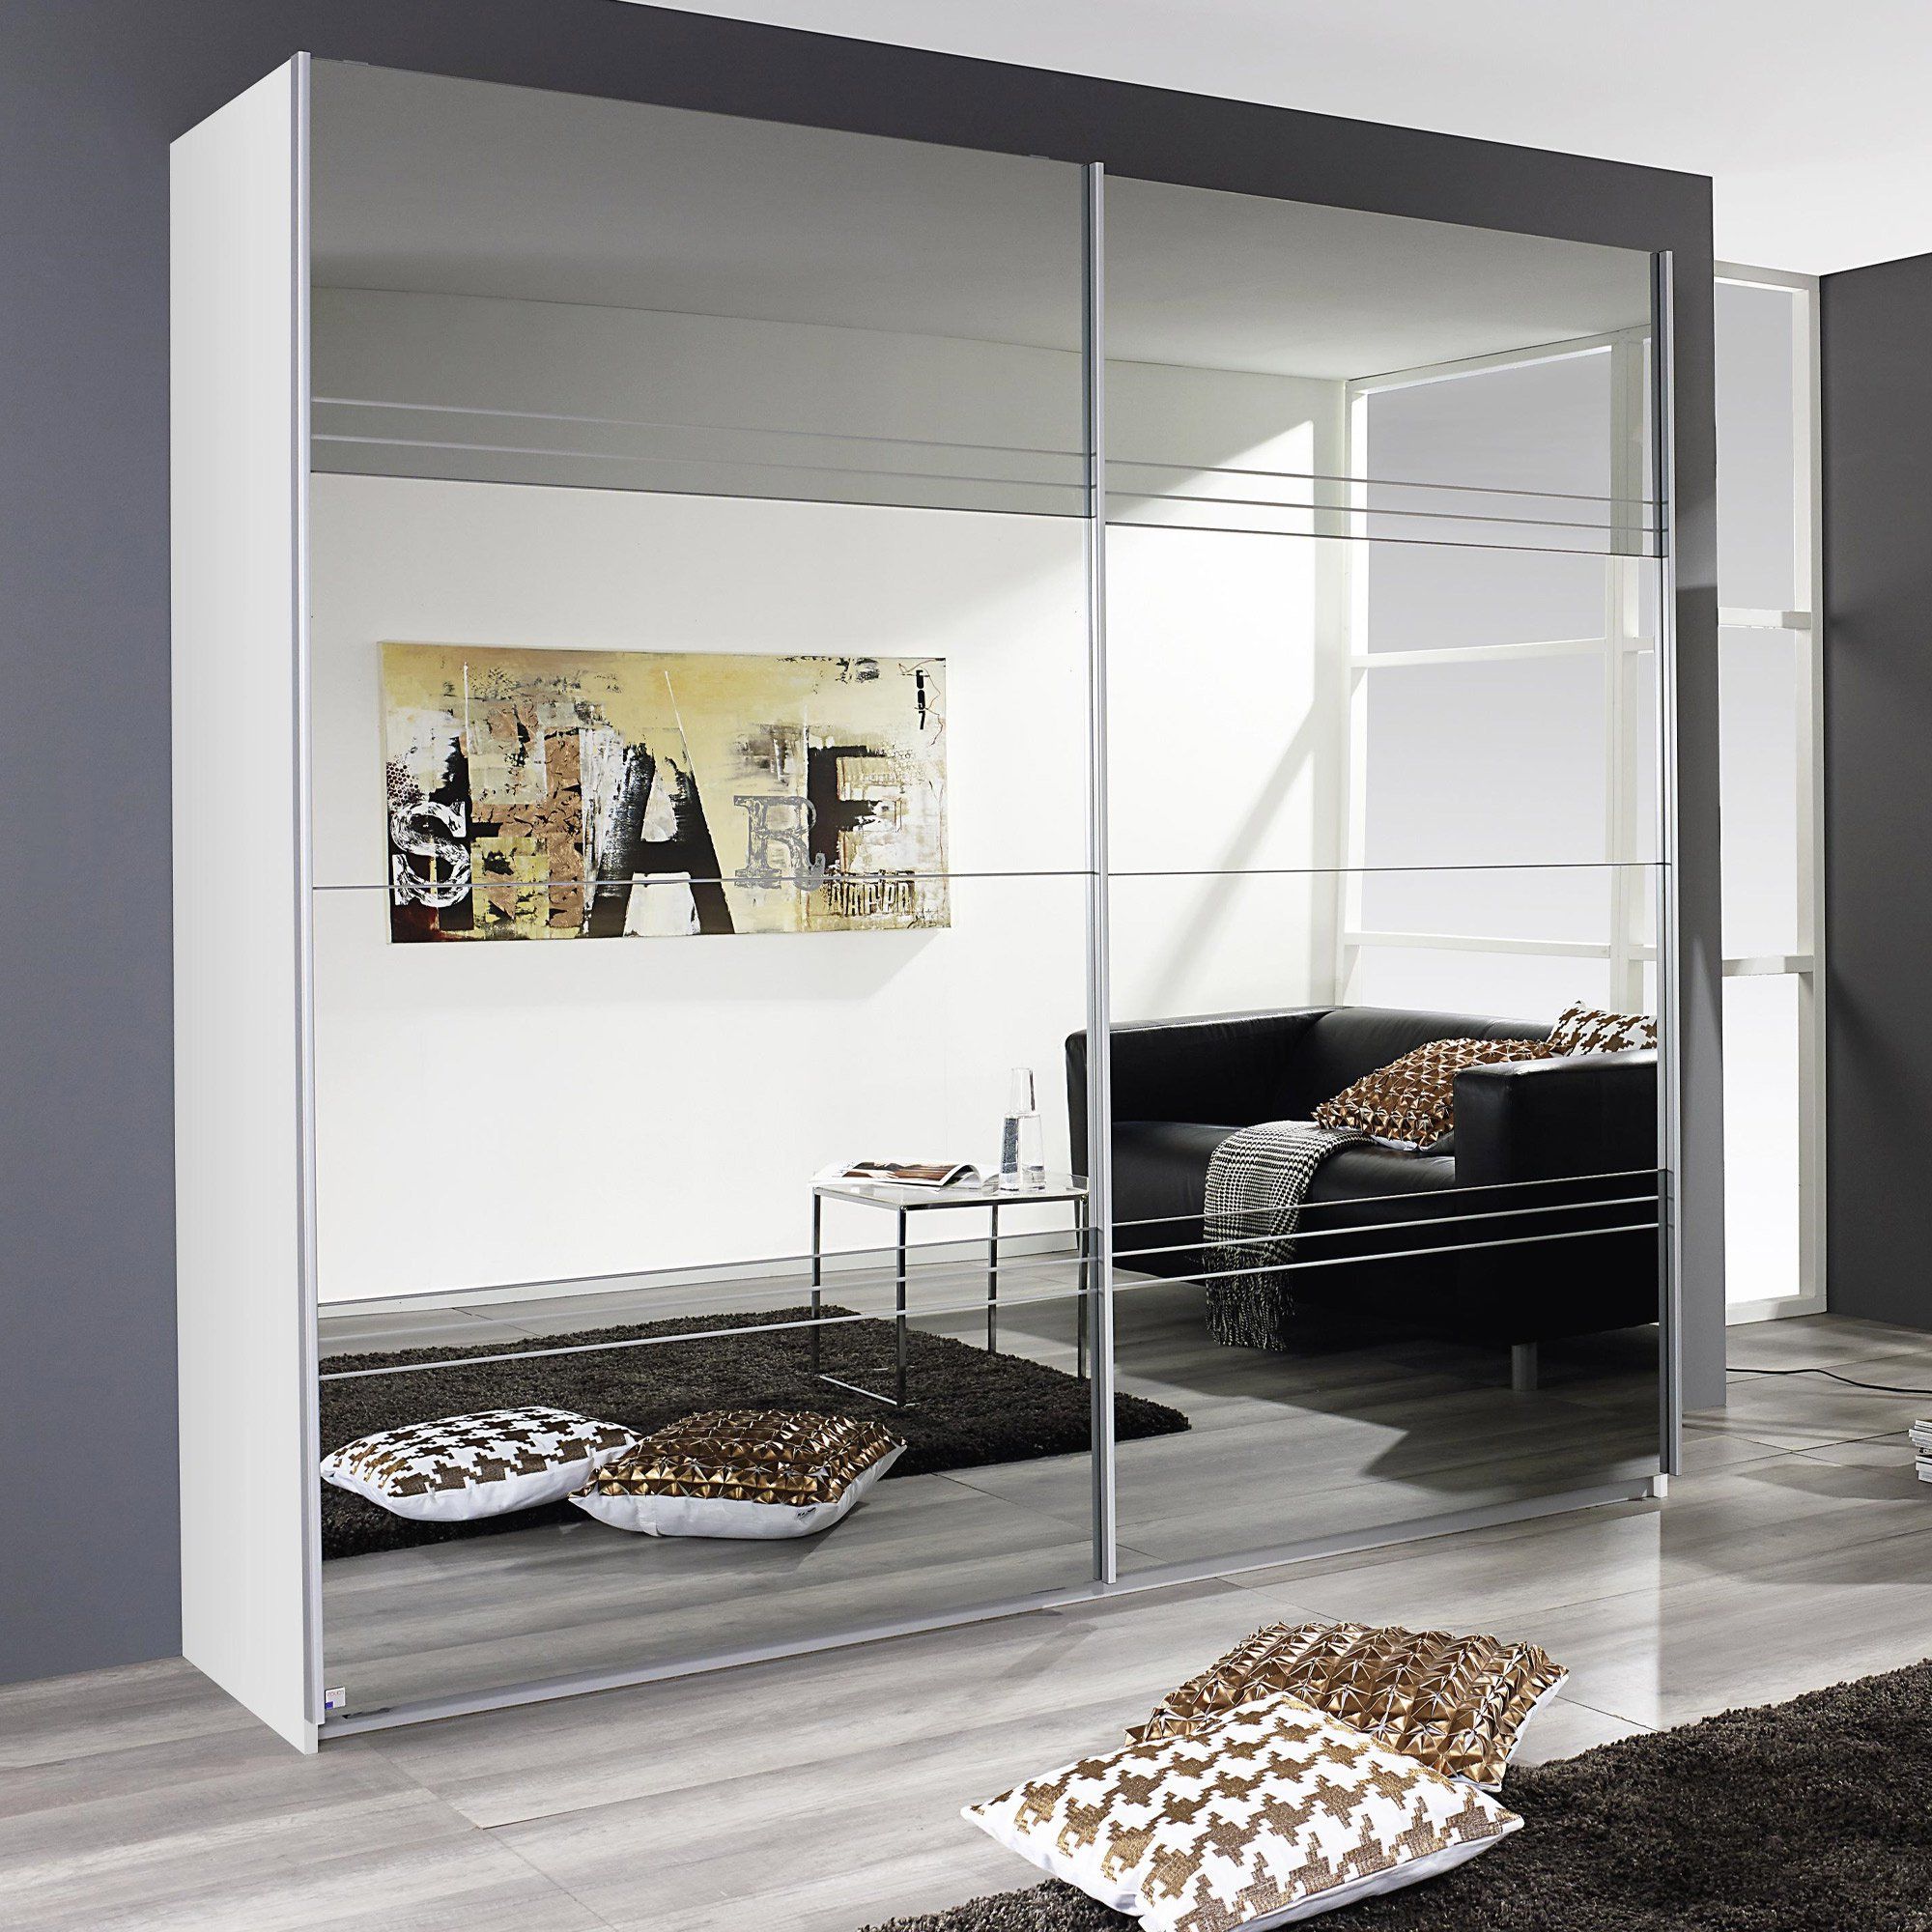 White Cleo Mirrored Door Gliding Door Wardrobe Throughout Double Wardrobes With Mirror (View 2 of 20)